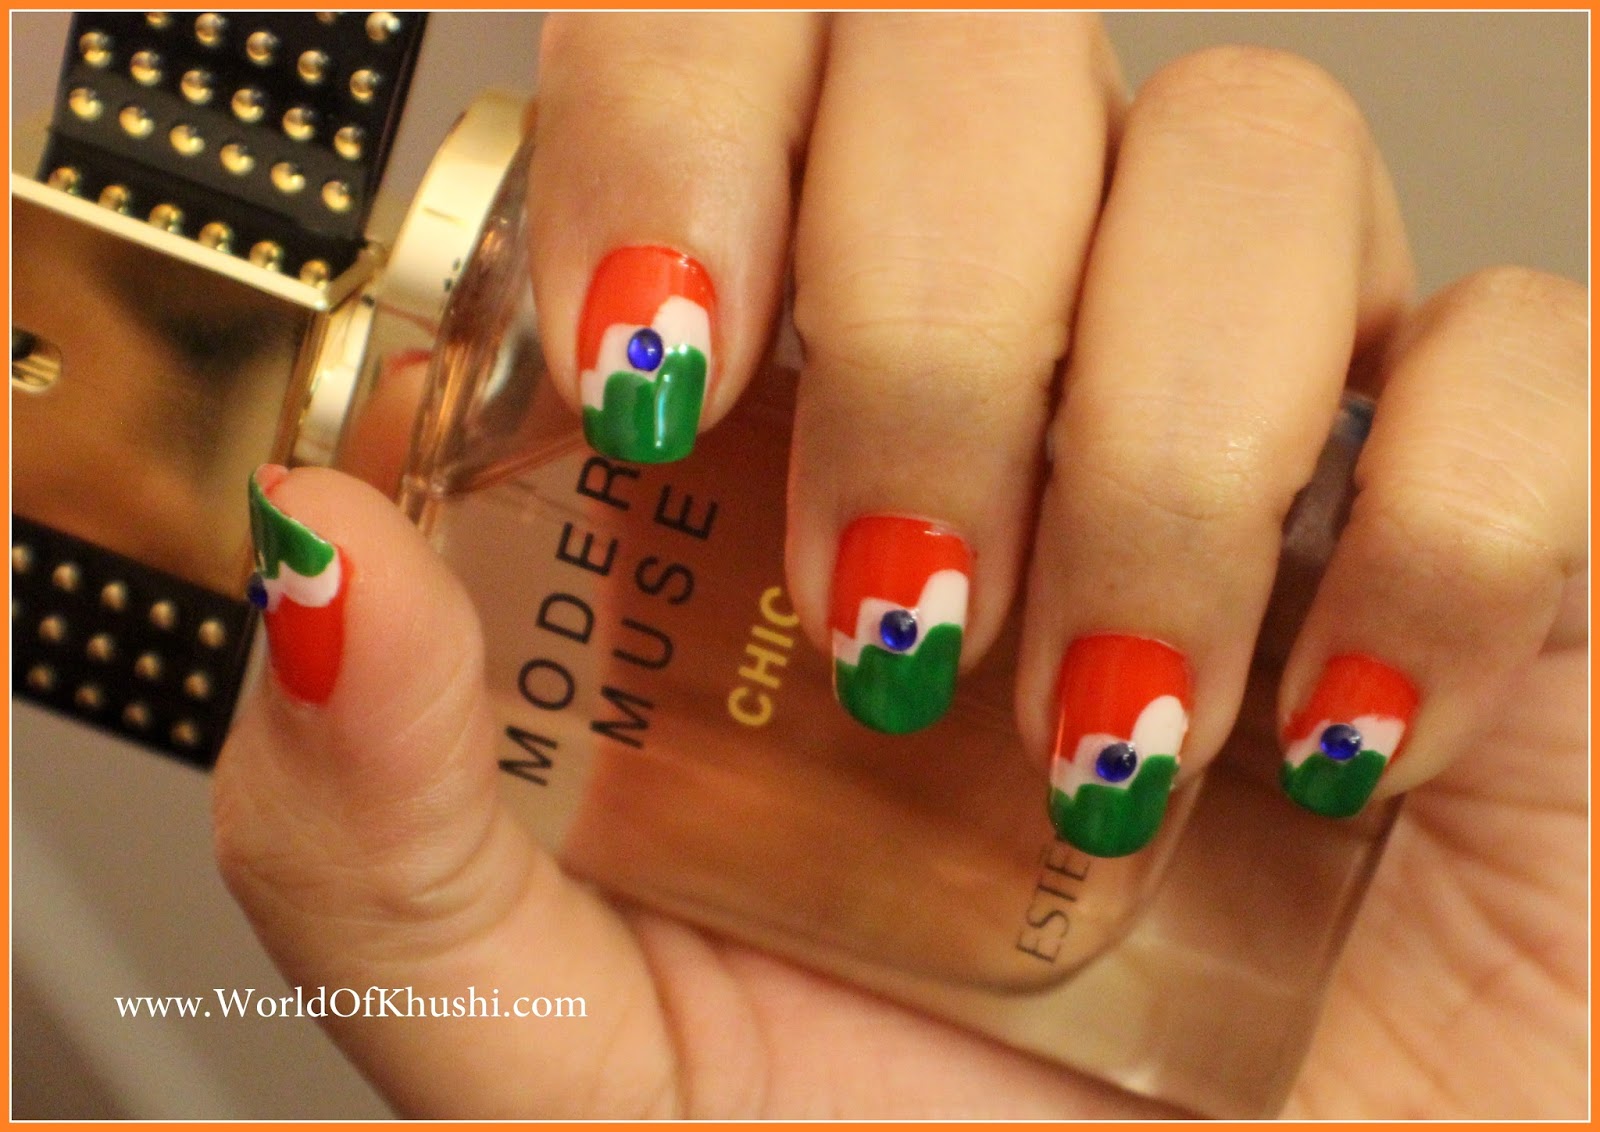 KhushiWorld - A World Of Recipes,Arts,Crafts,DIY,Fashion,Beauty and much  more: Tri-Color Scallop Nail Art | Festive Special